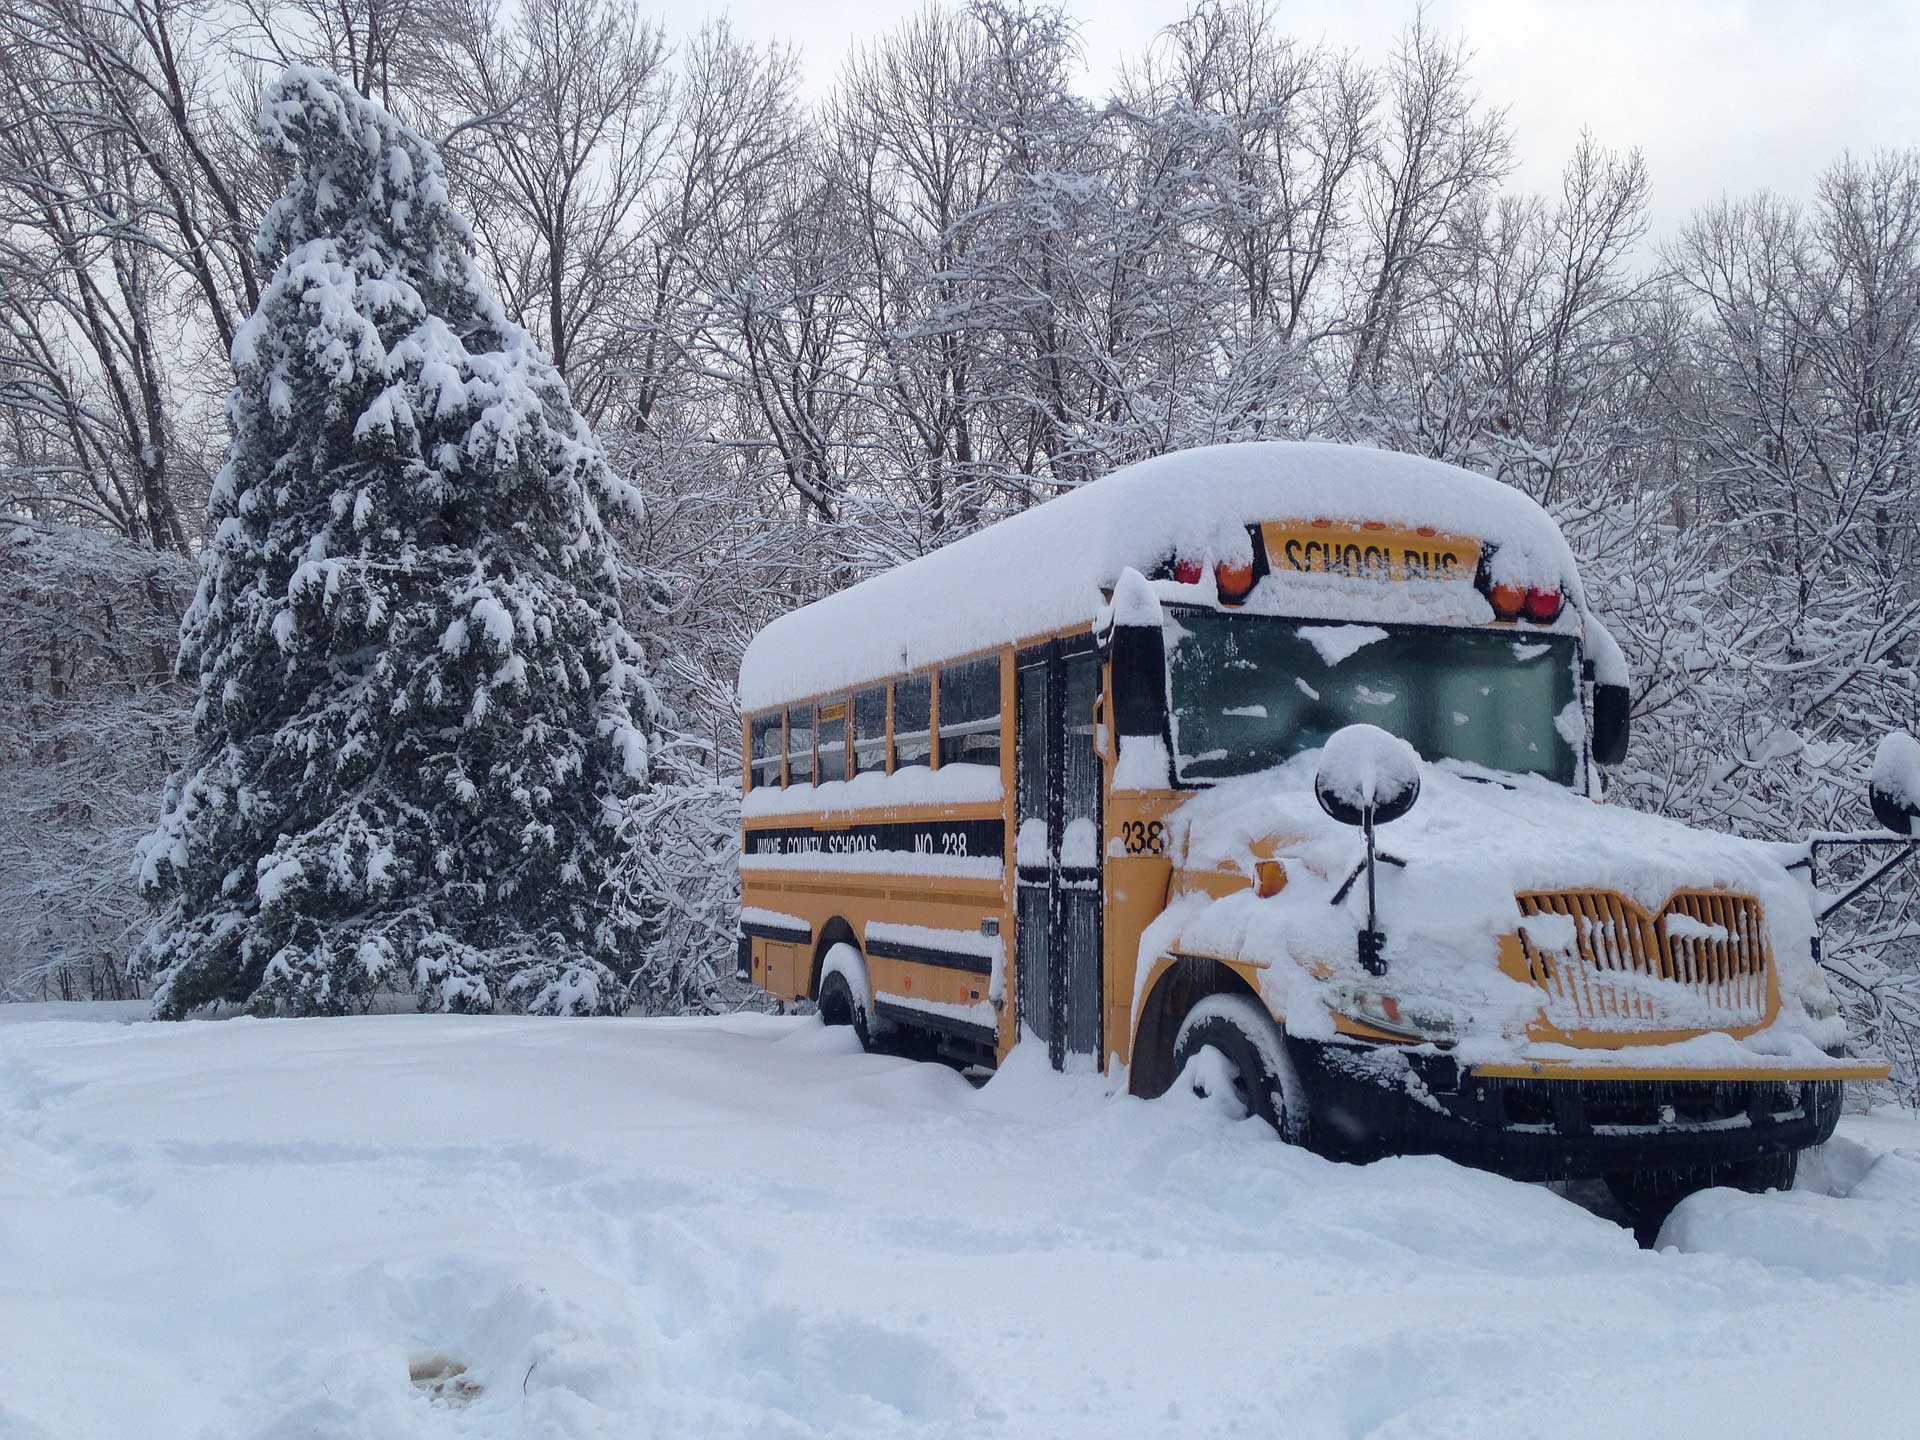 snowy bus - online learning policies